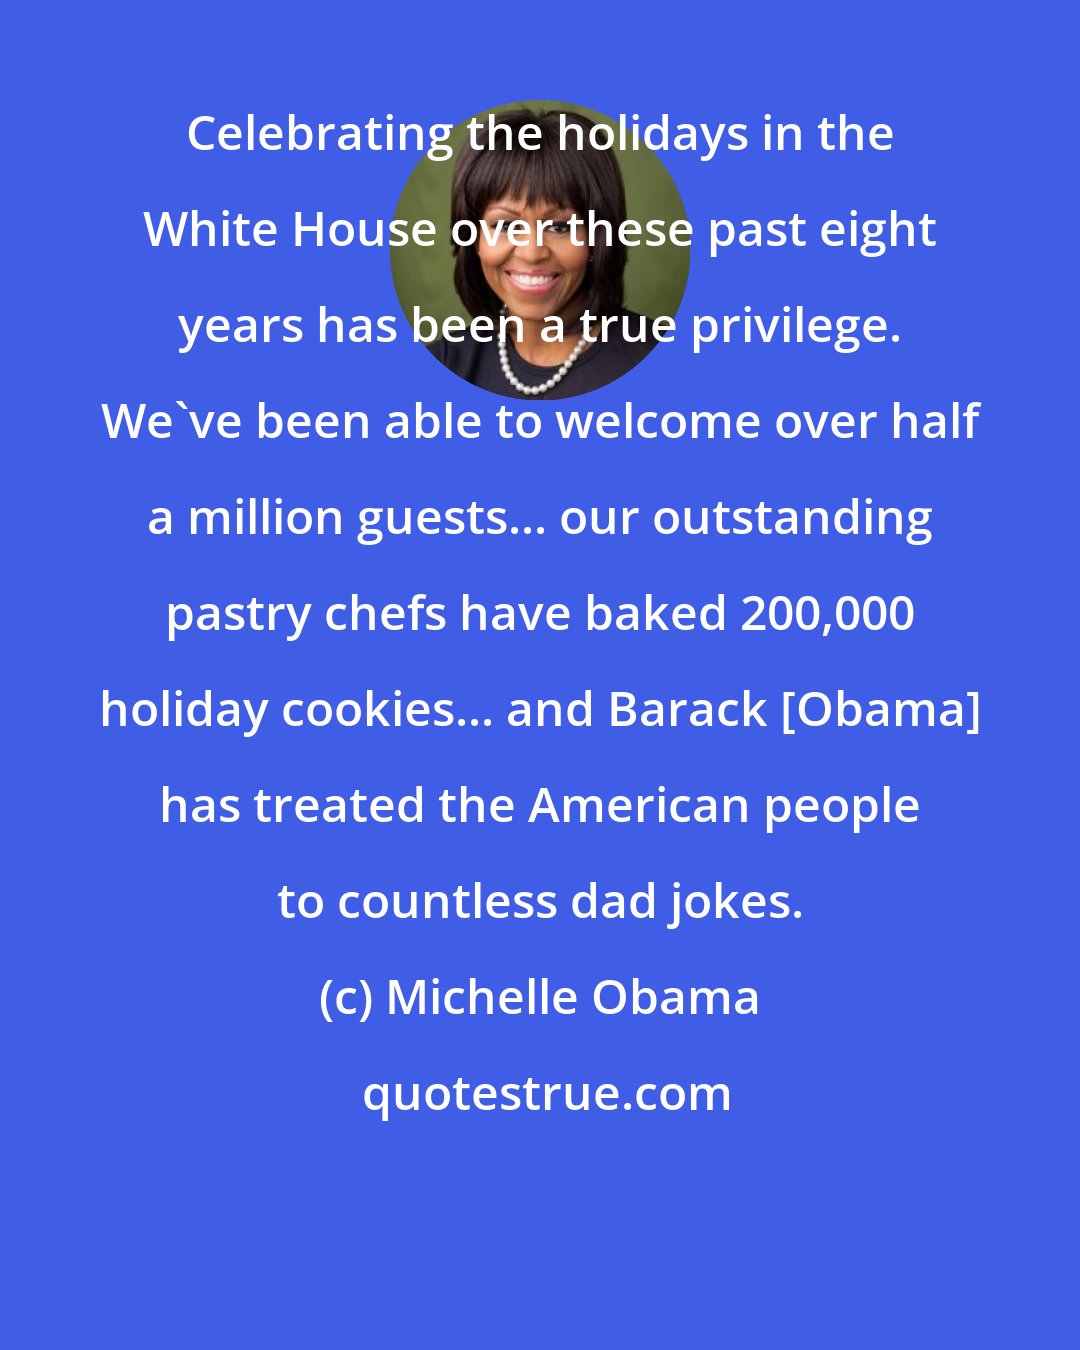 Michelle Obama: Celebrating the holidays in the White House over these past eight years has been a true privilege. We've been able to welcome over half a million guests... our outstanding pastry chefs have baked 200,000 holiday cookies... and Barack [Obama] has treated the American people to countless dad jokes.